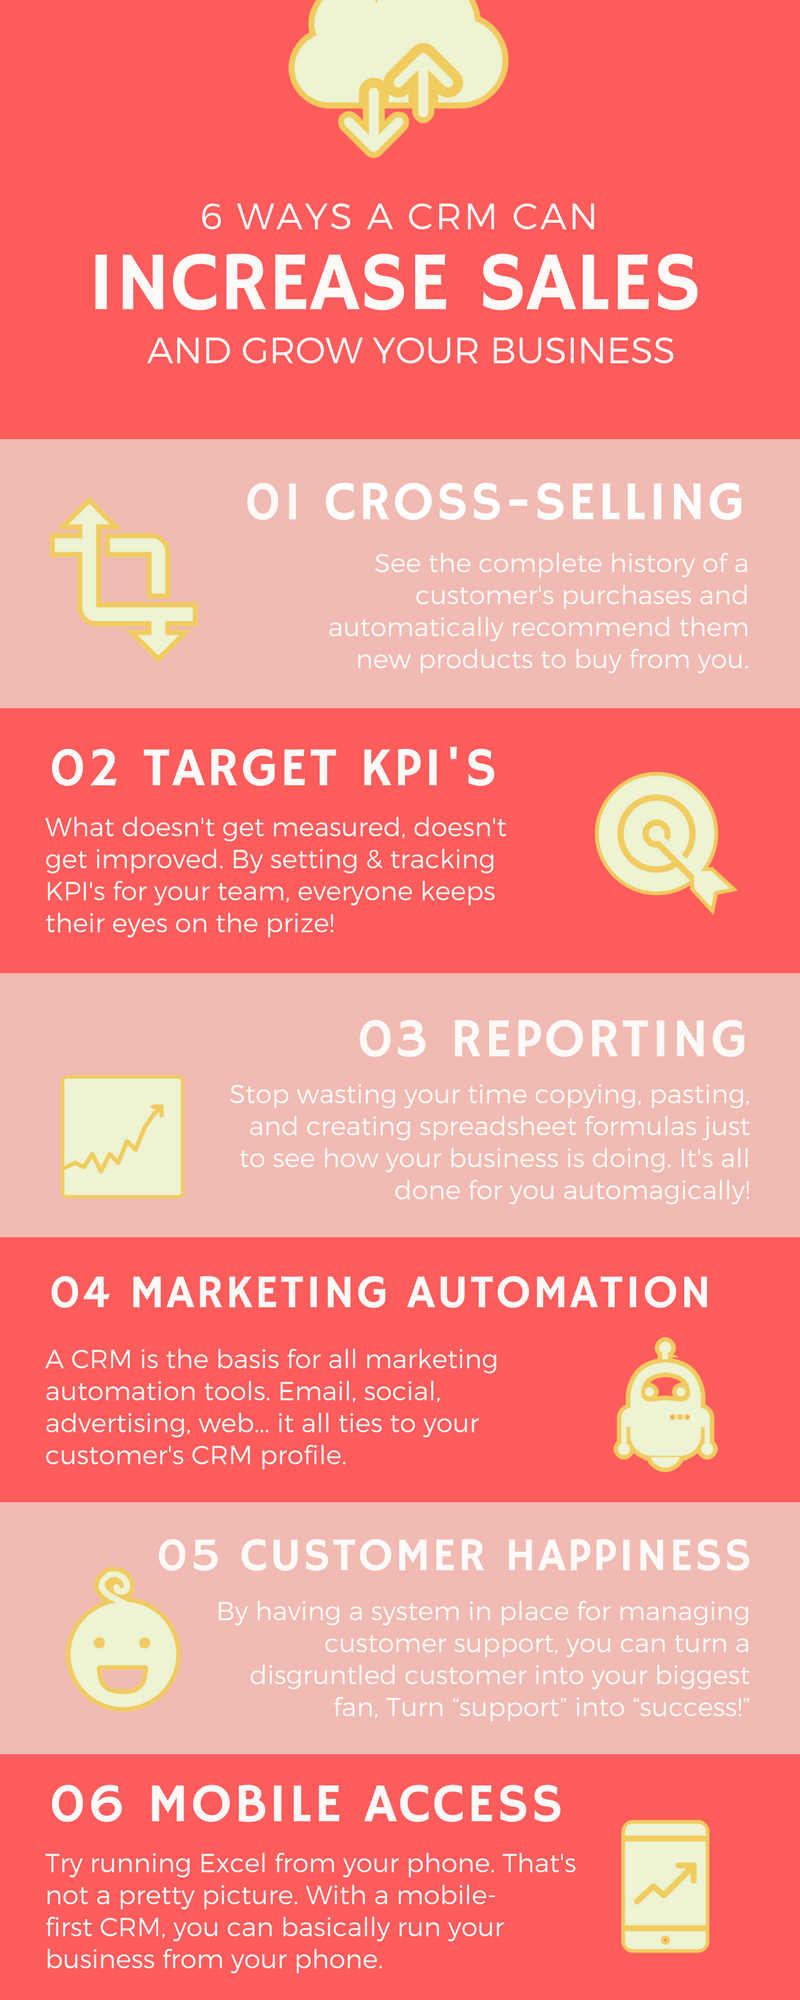 6 ways a CRM can increase sales and grow business infographic